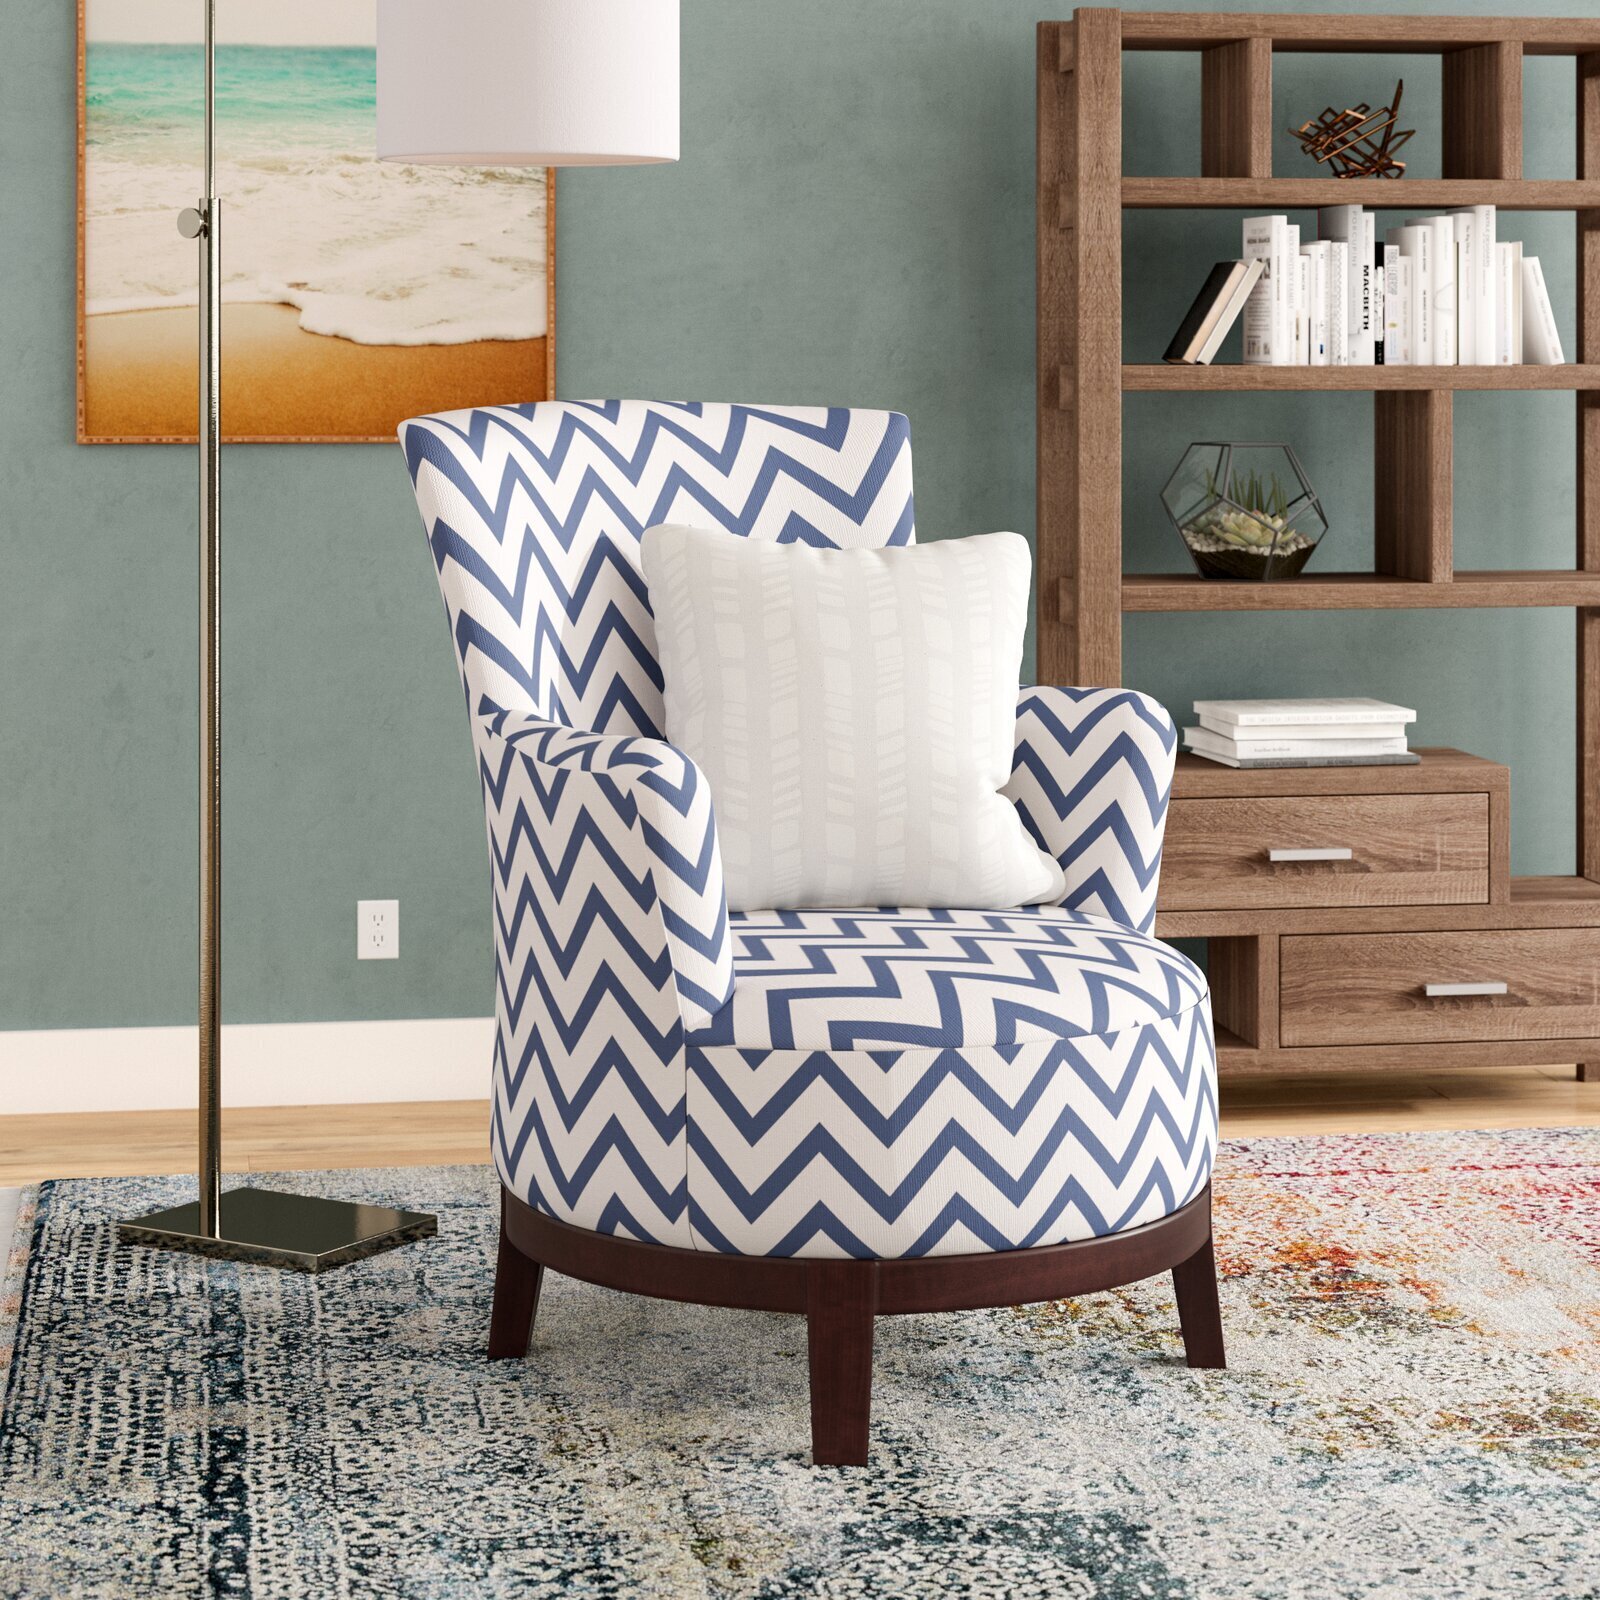 Chevron Patterned Arm Chair